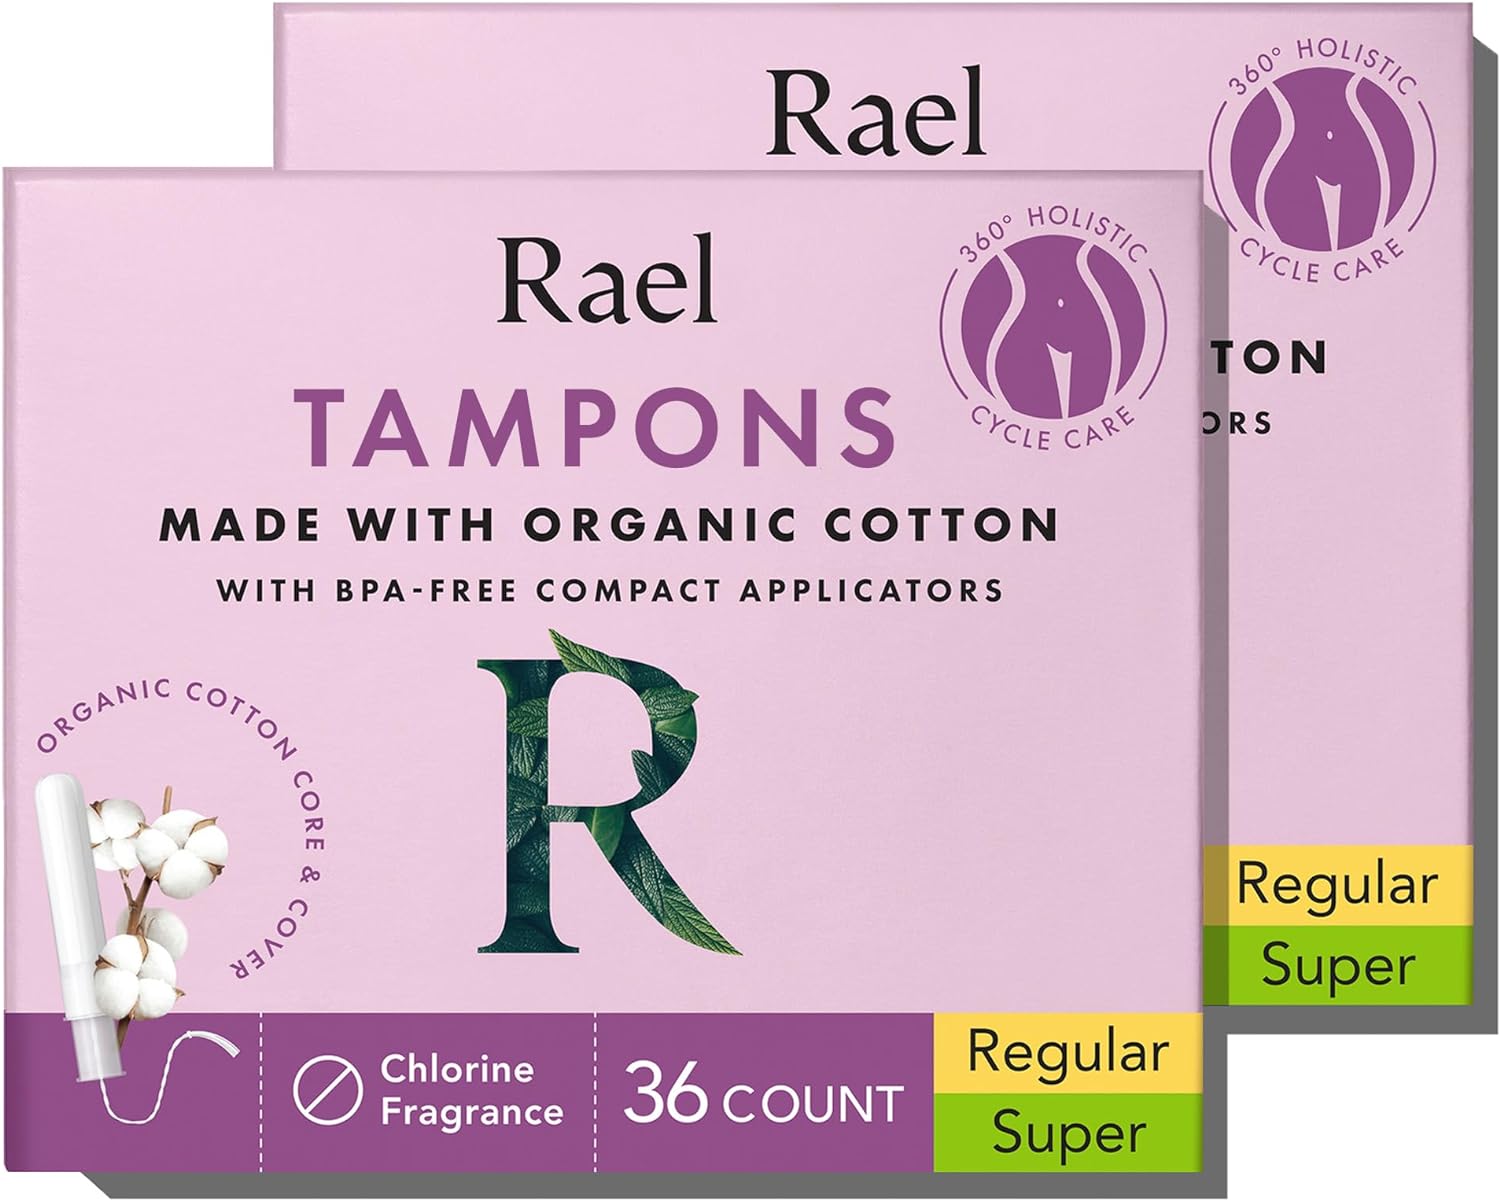 Rael Tampons, Compact Applicator Tampon Made with Organic Cotton - Tampons Multipack, Regular and Super Absorbency, BPA-Free, Chlorine Free, Leak Locker Technology (72 Count, Bundle)